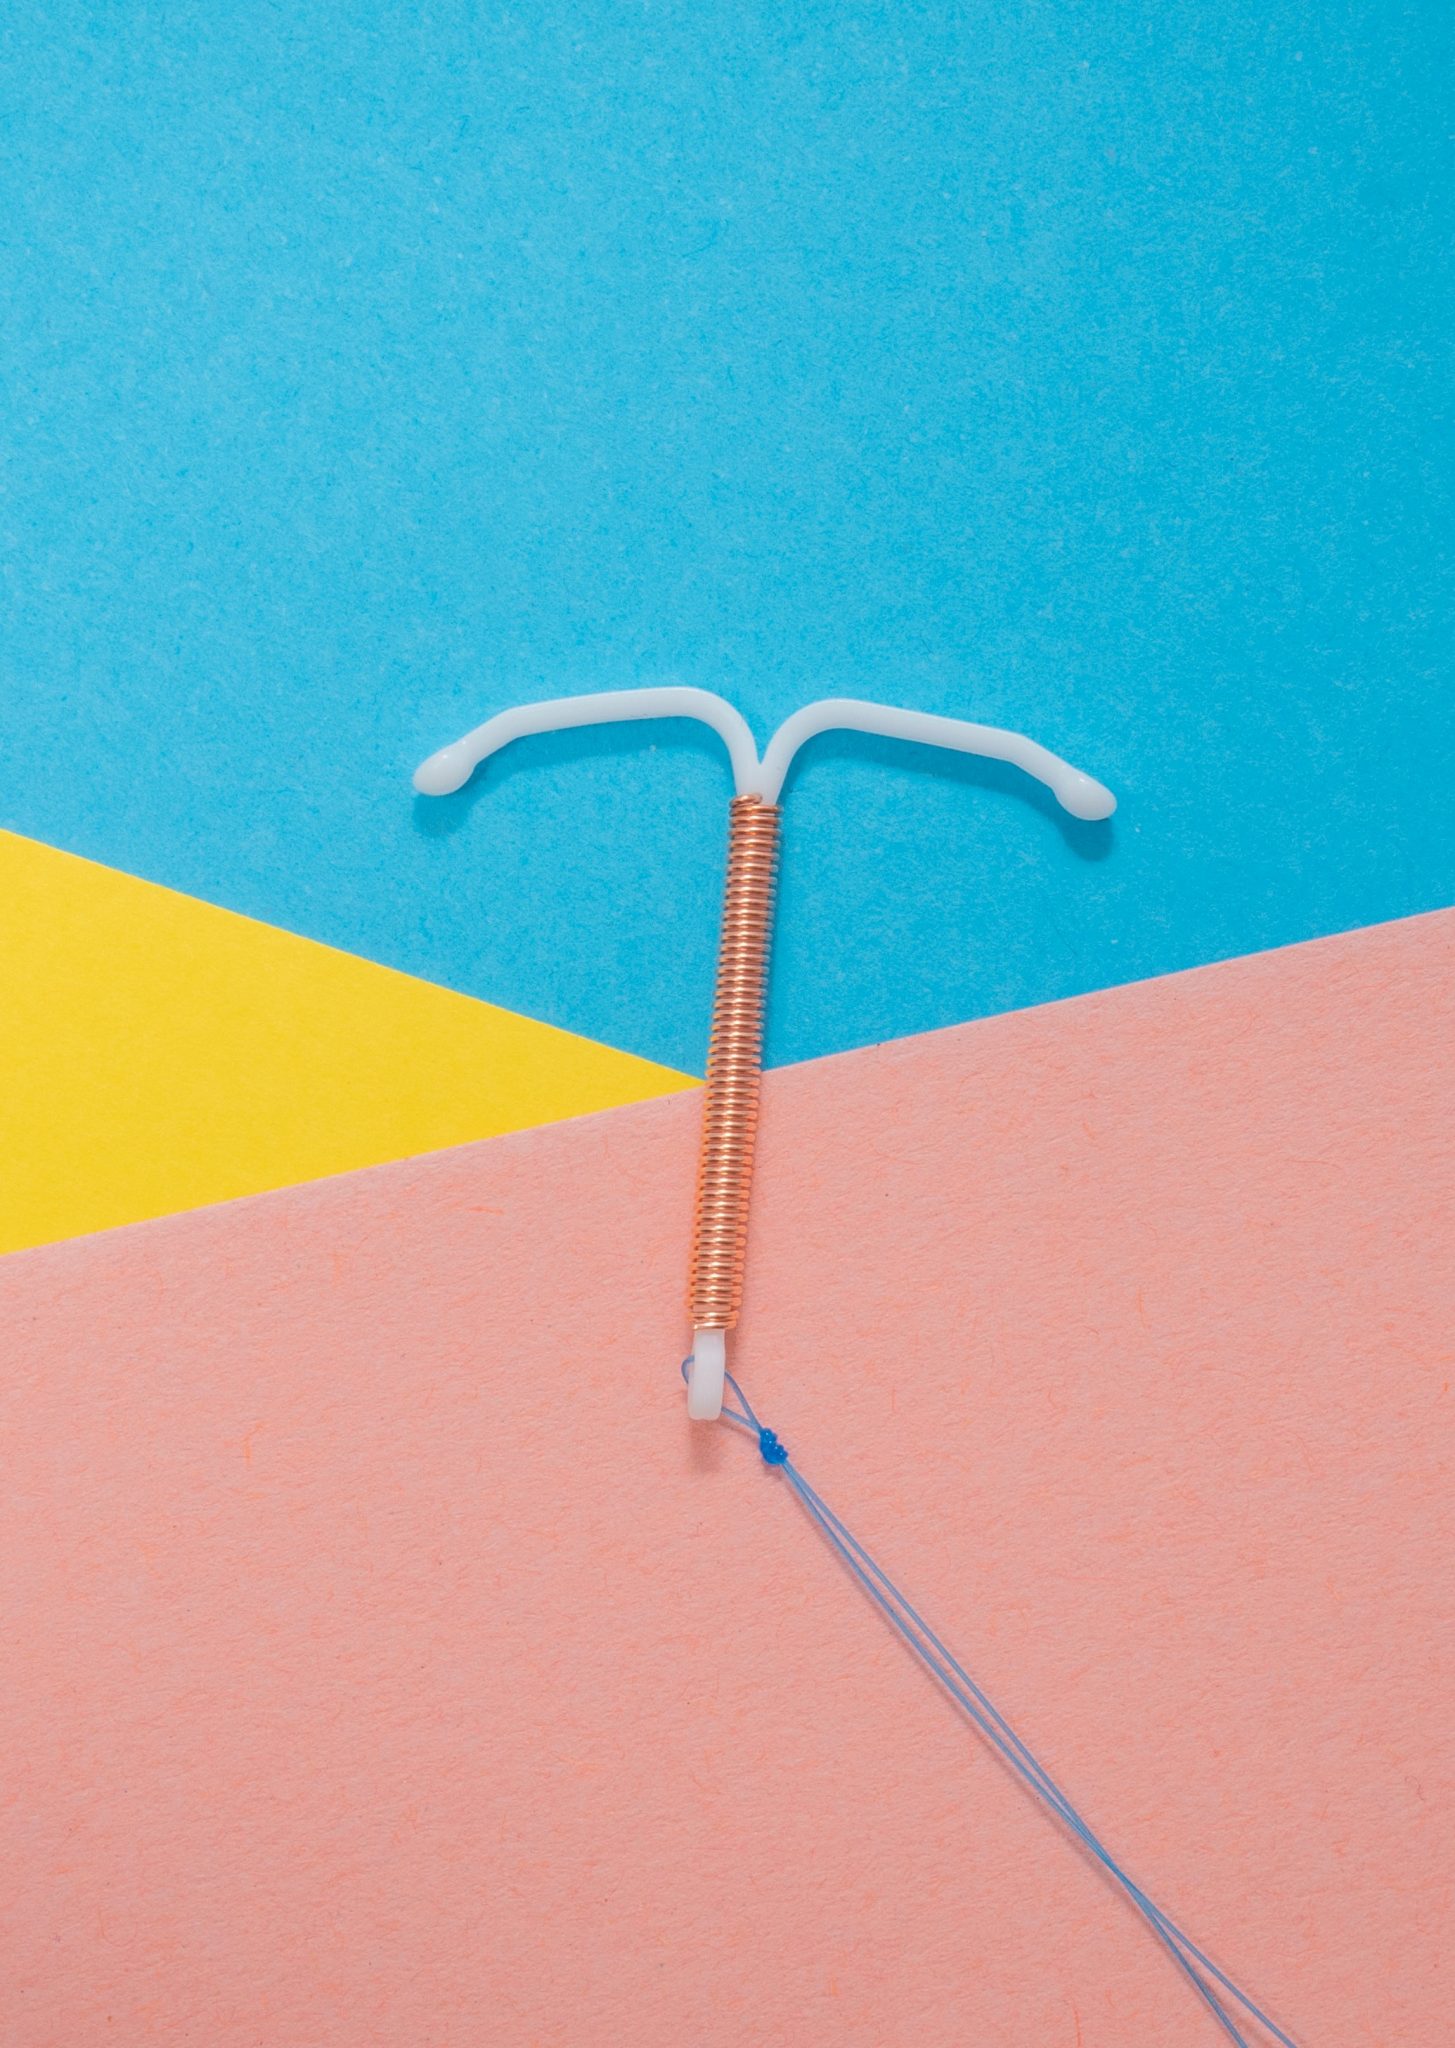 IUD Mirena insertions and removals